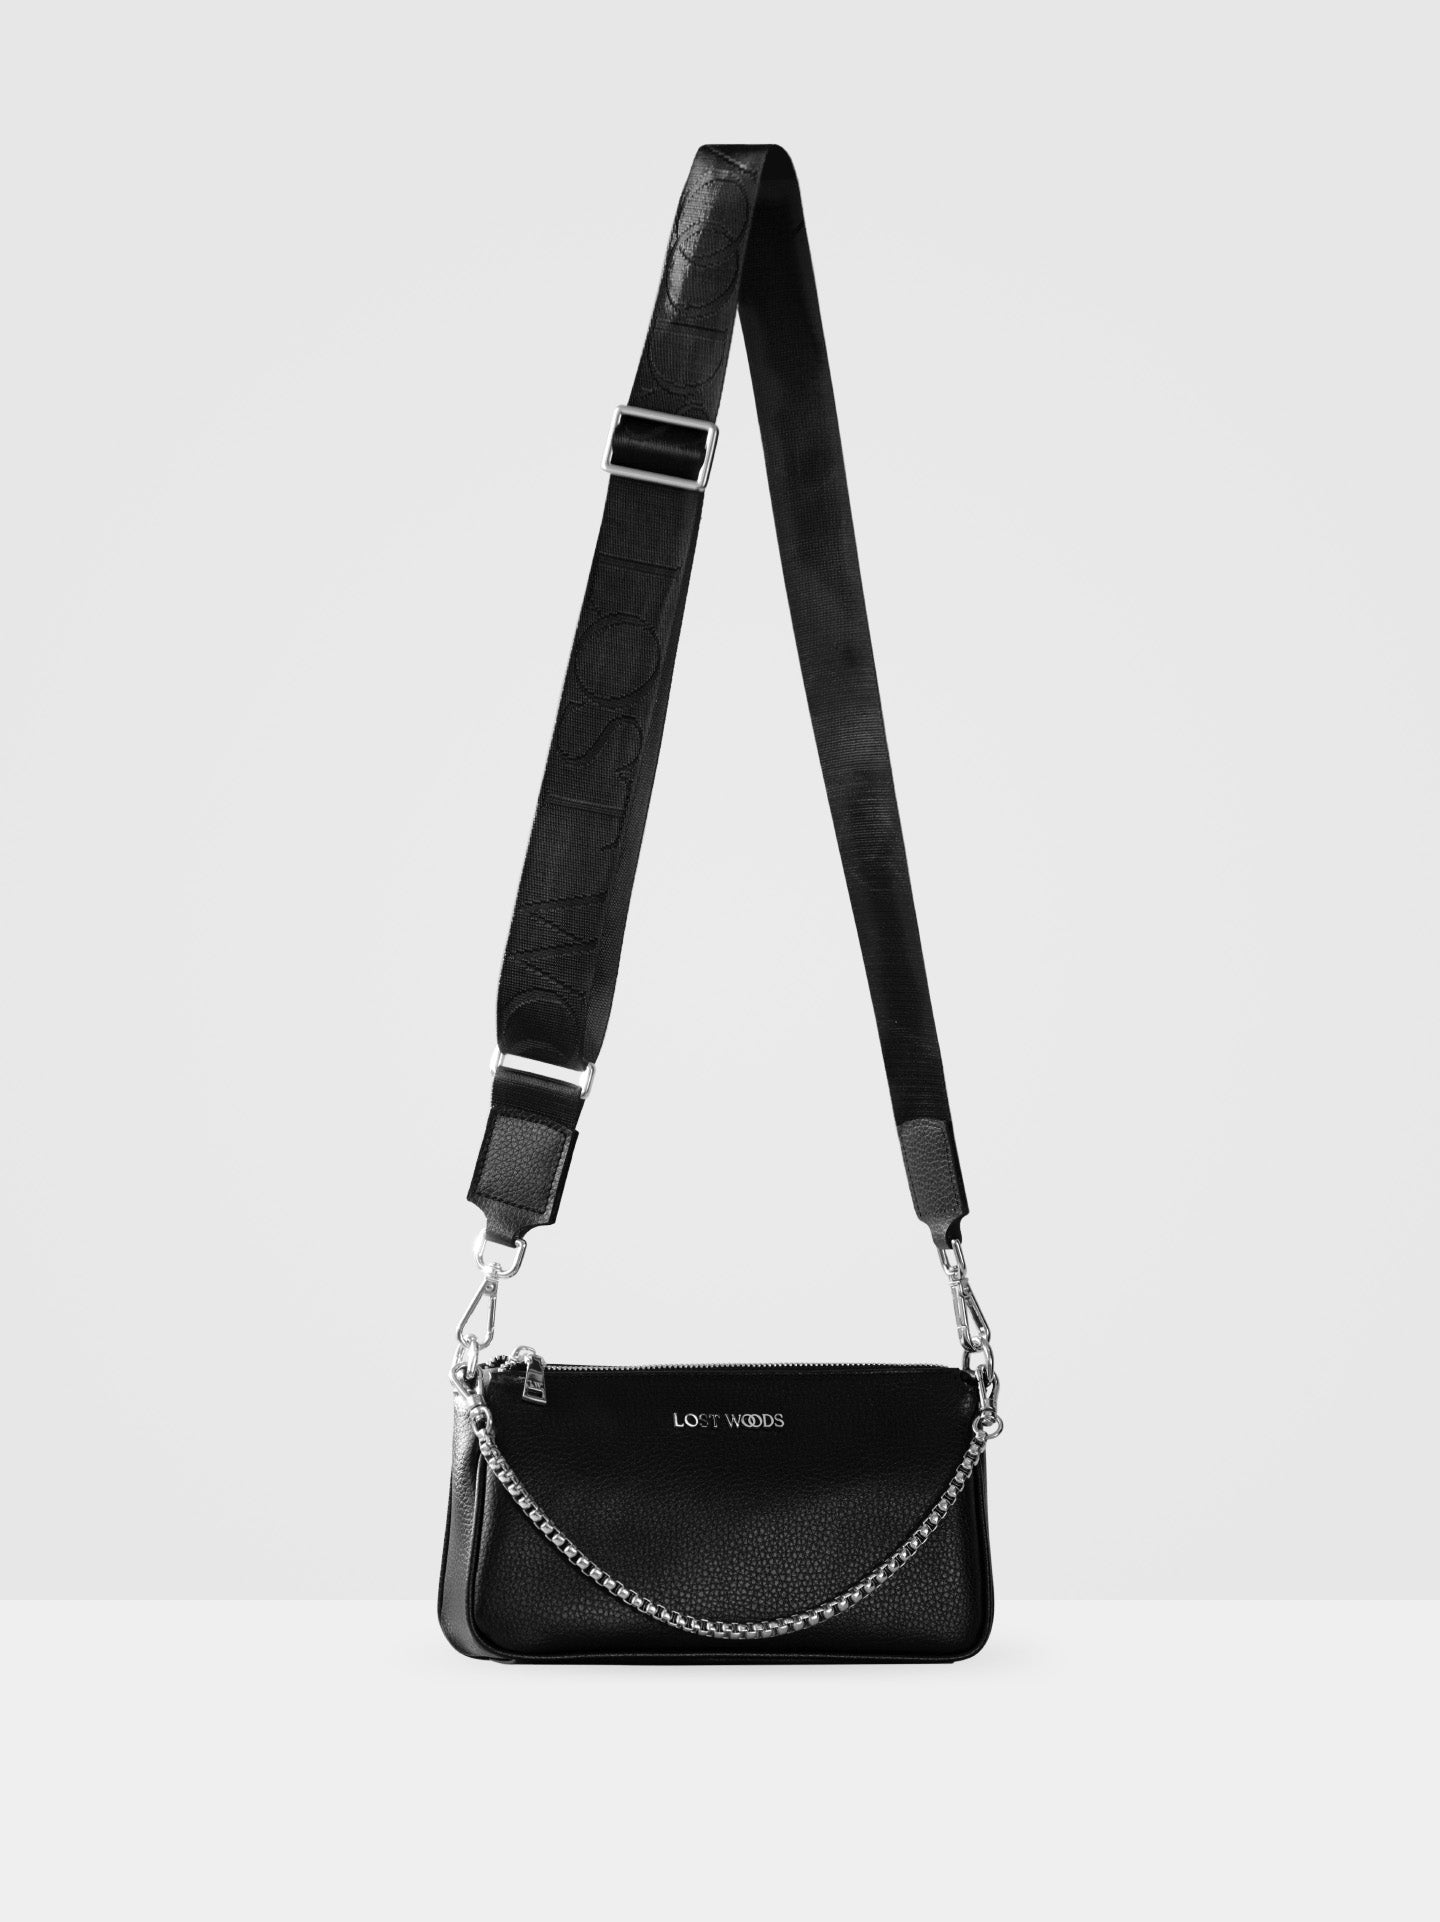 Thick Crossbody Bag Strap, Black and Silver